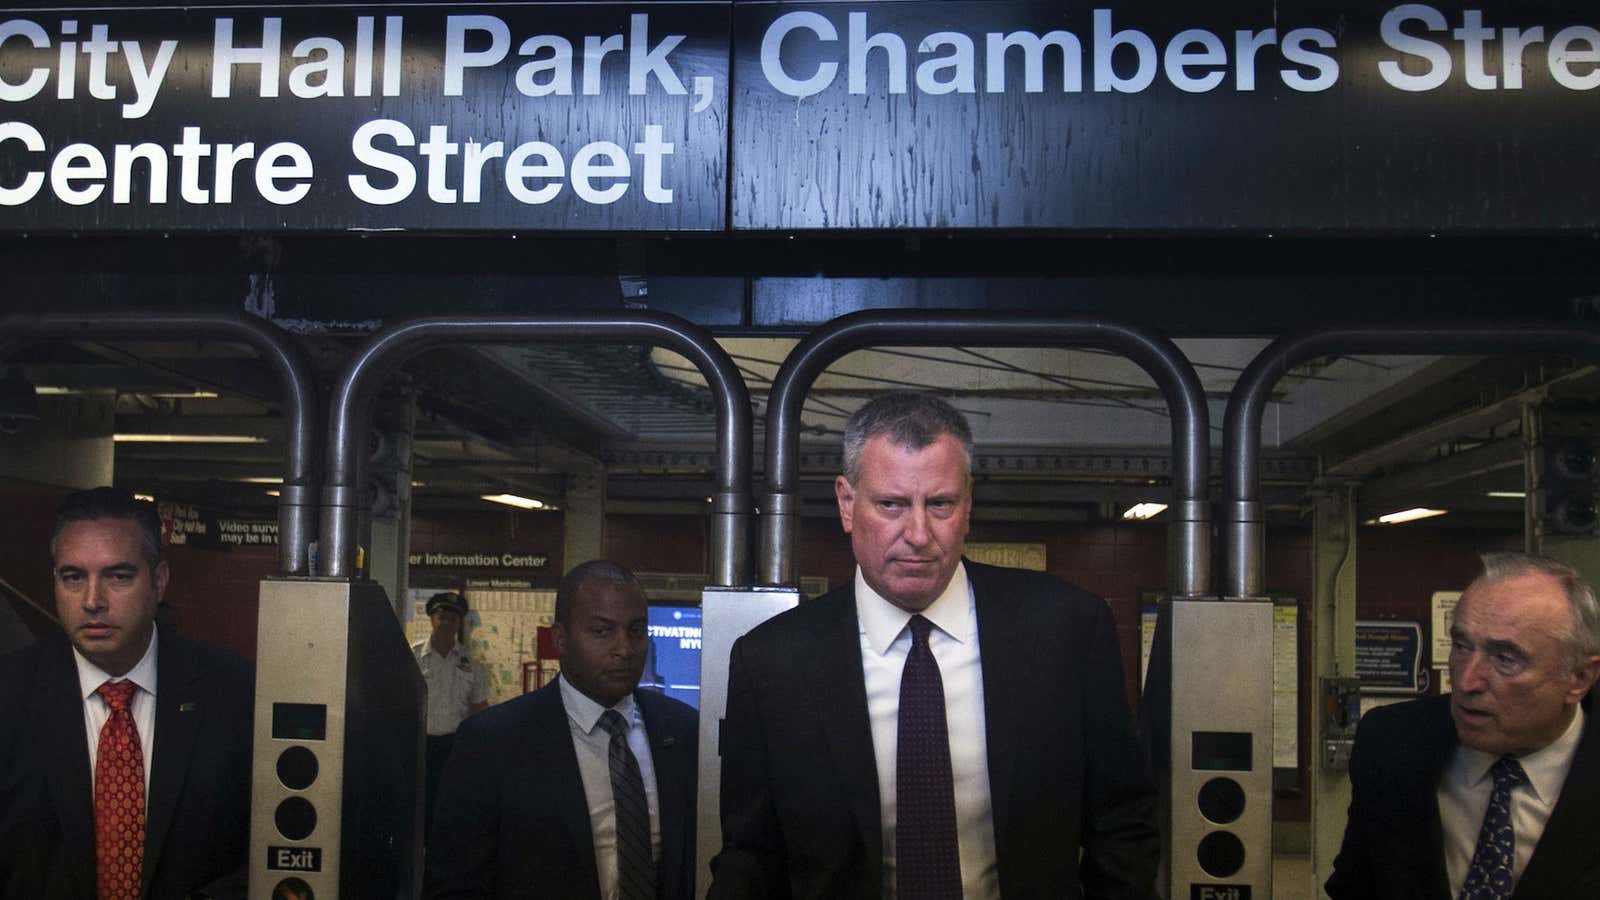 New York City Mayor Bill de Blasio (second from the right) and police commissioner William Bratton emerge from the subway for a press conference.